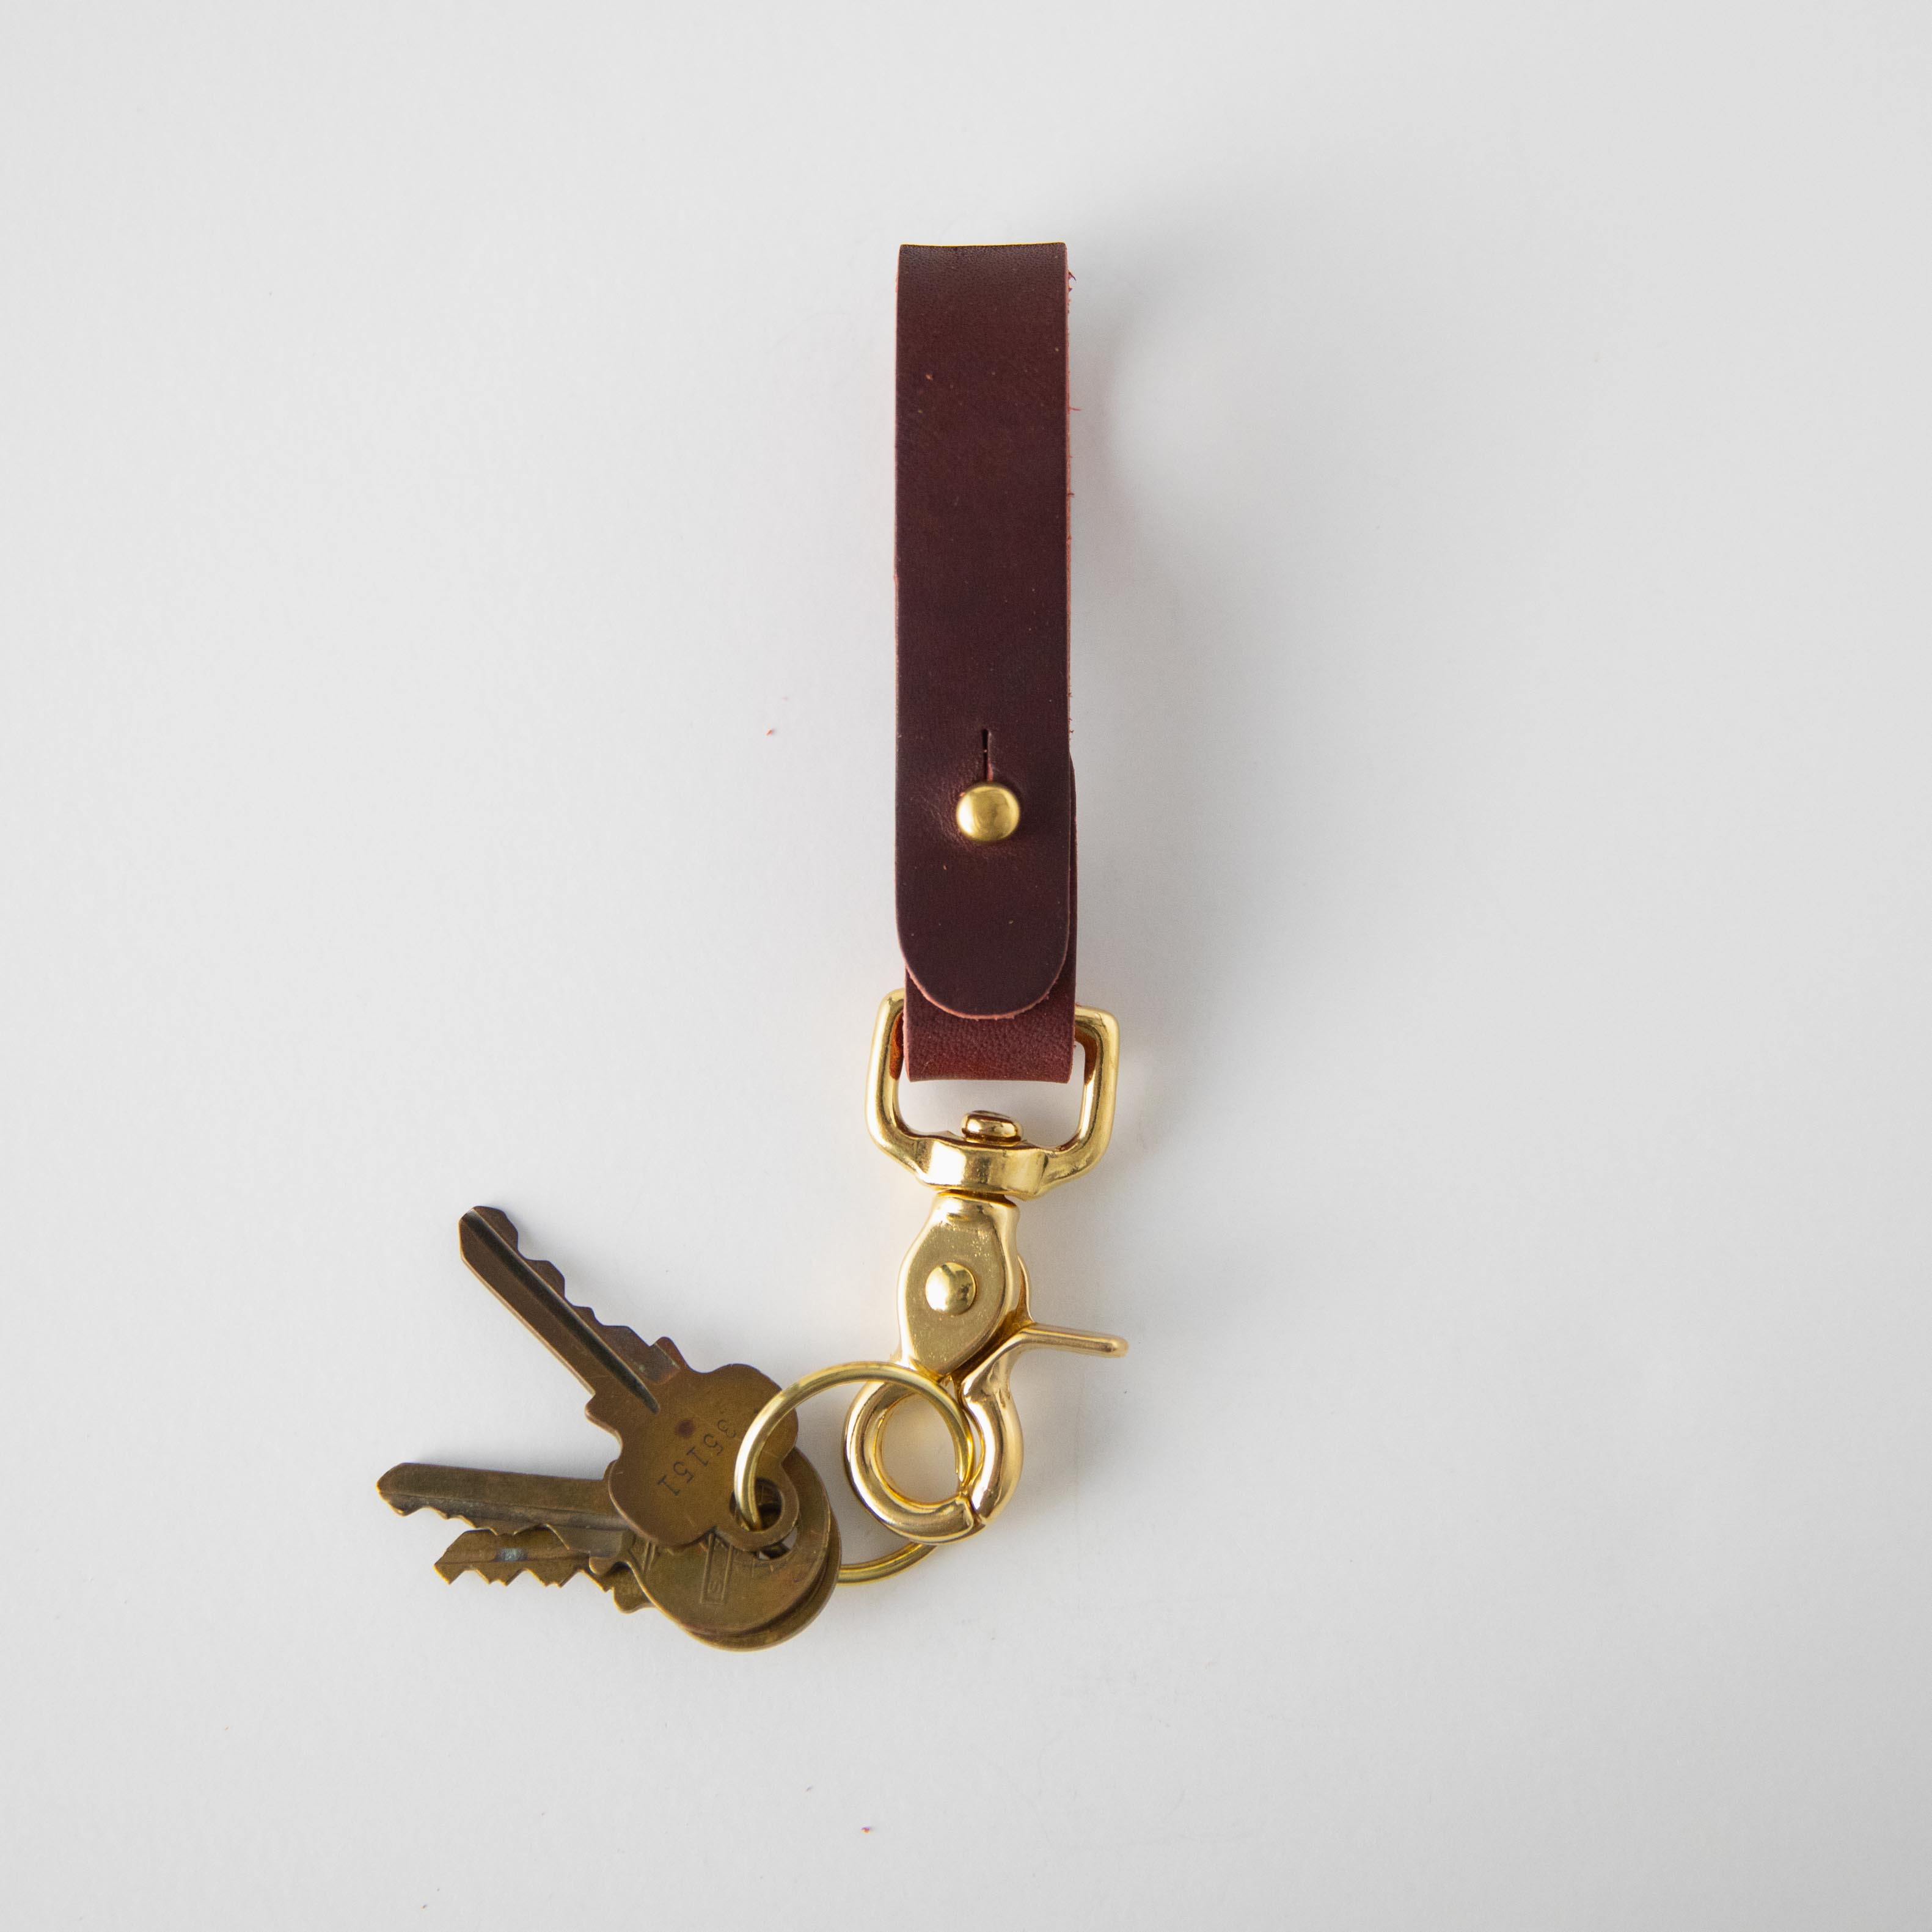 Leather Keychains: Oxblood Key Lanyard | Leather Key Rings by KMM & Co Yes